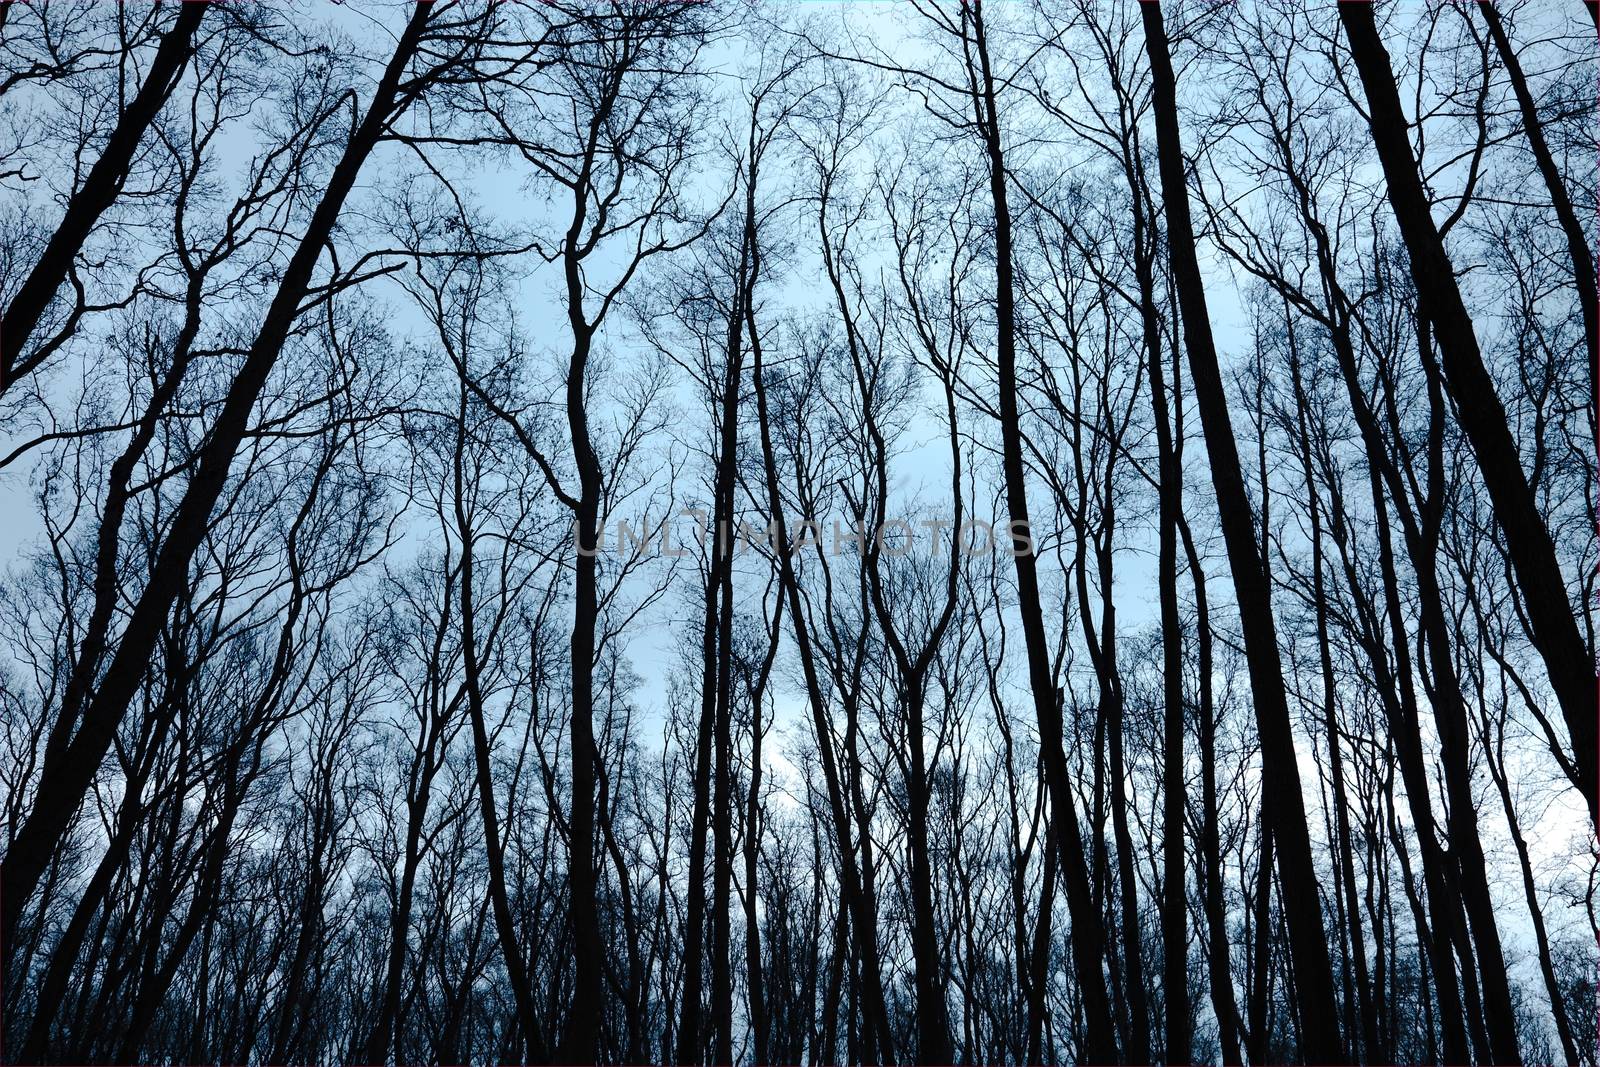 Bare trees of an autumn forest